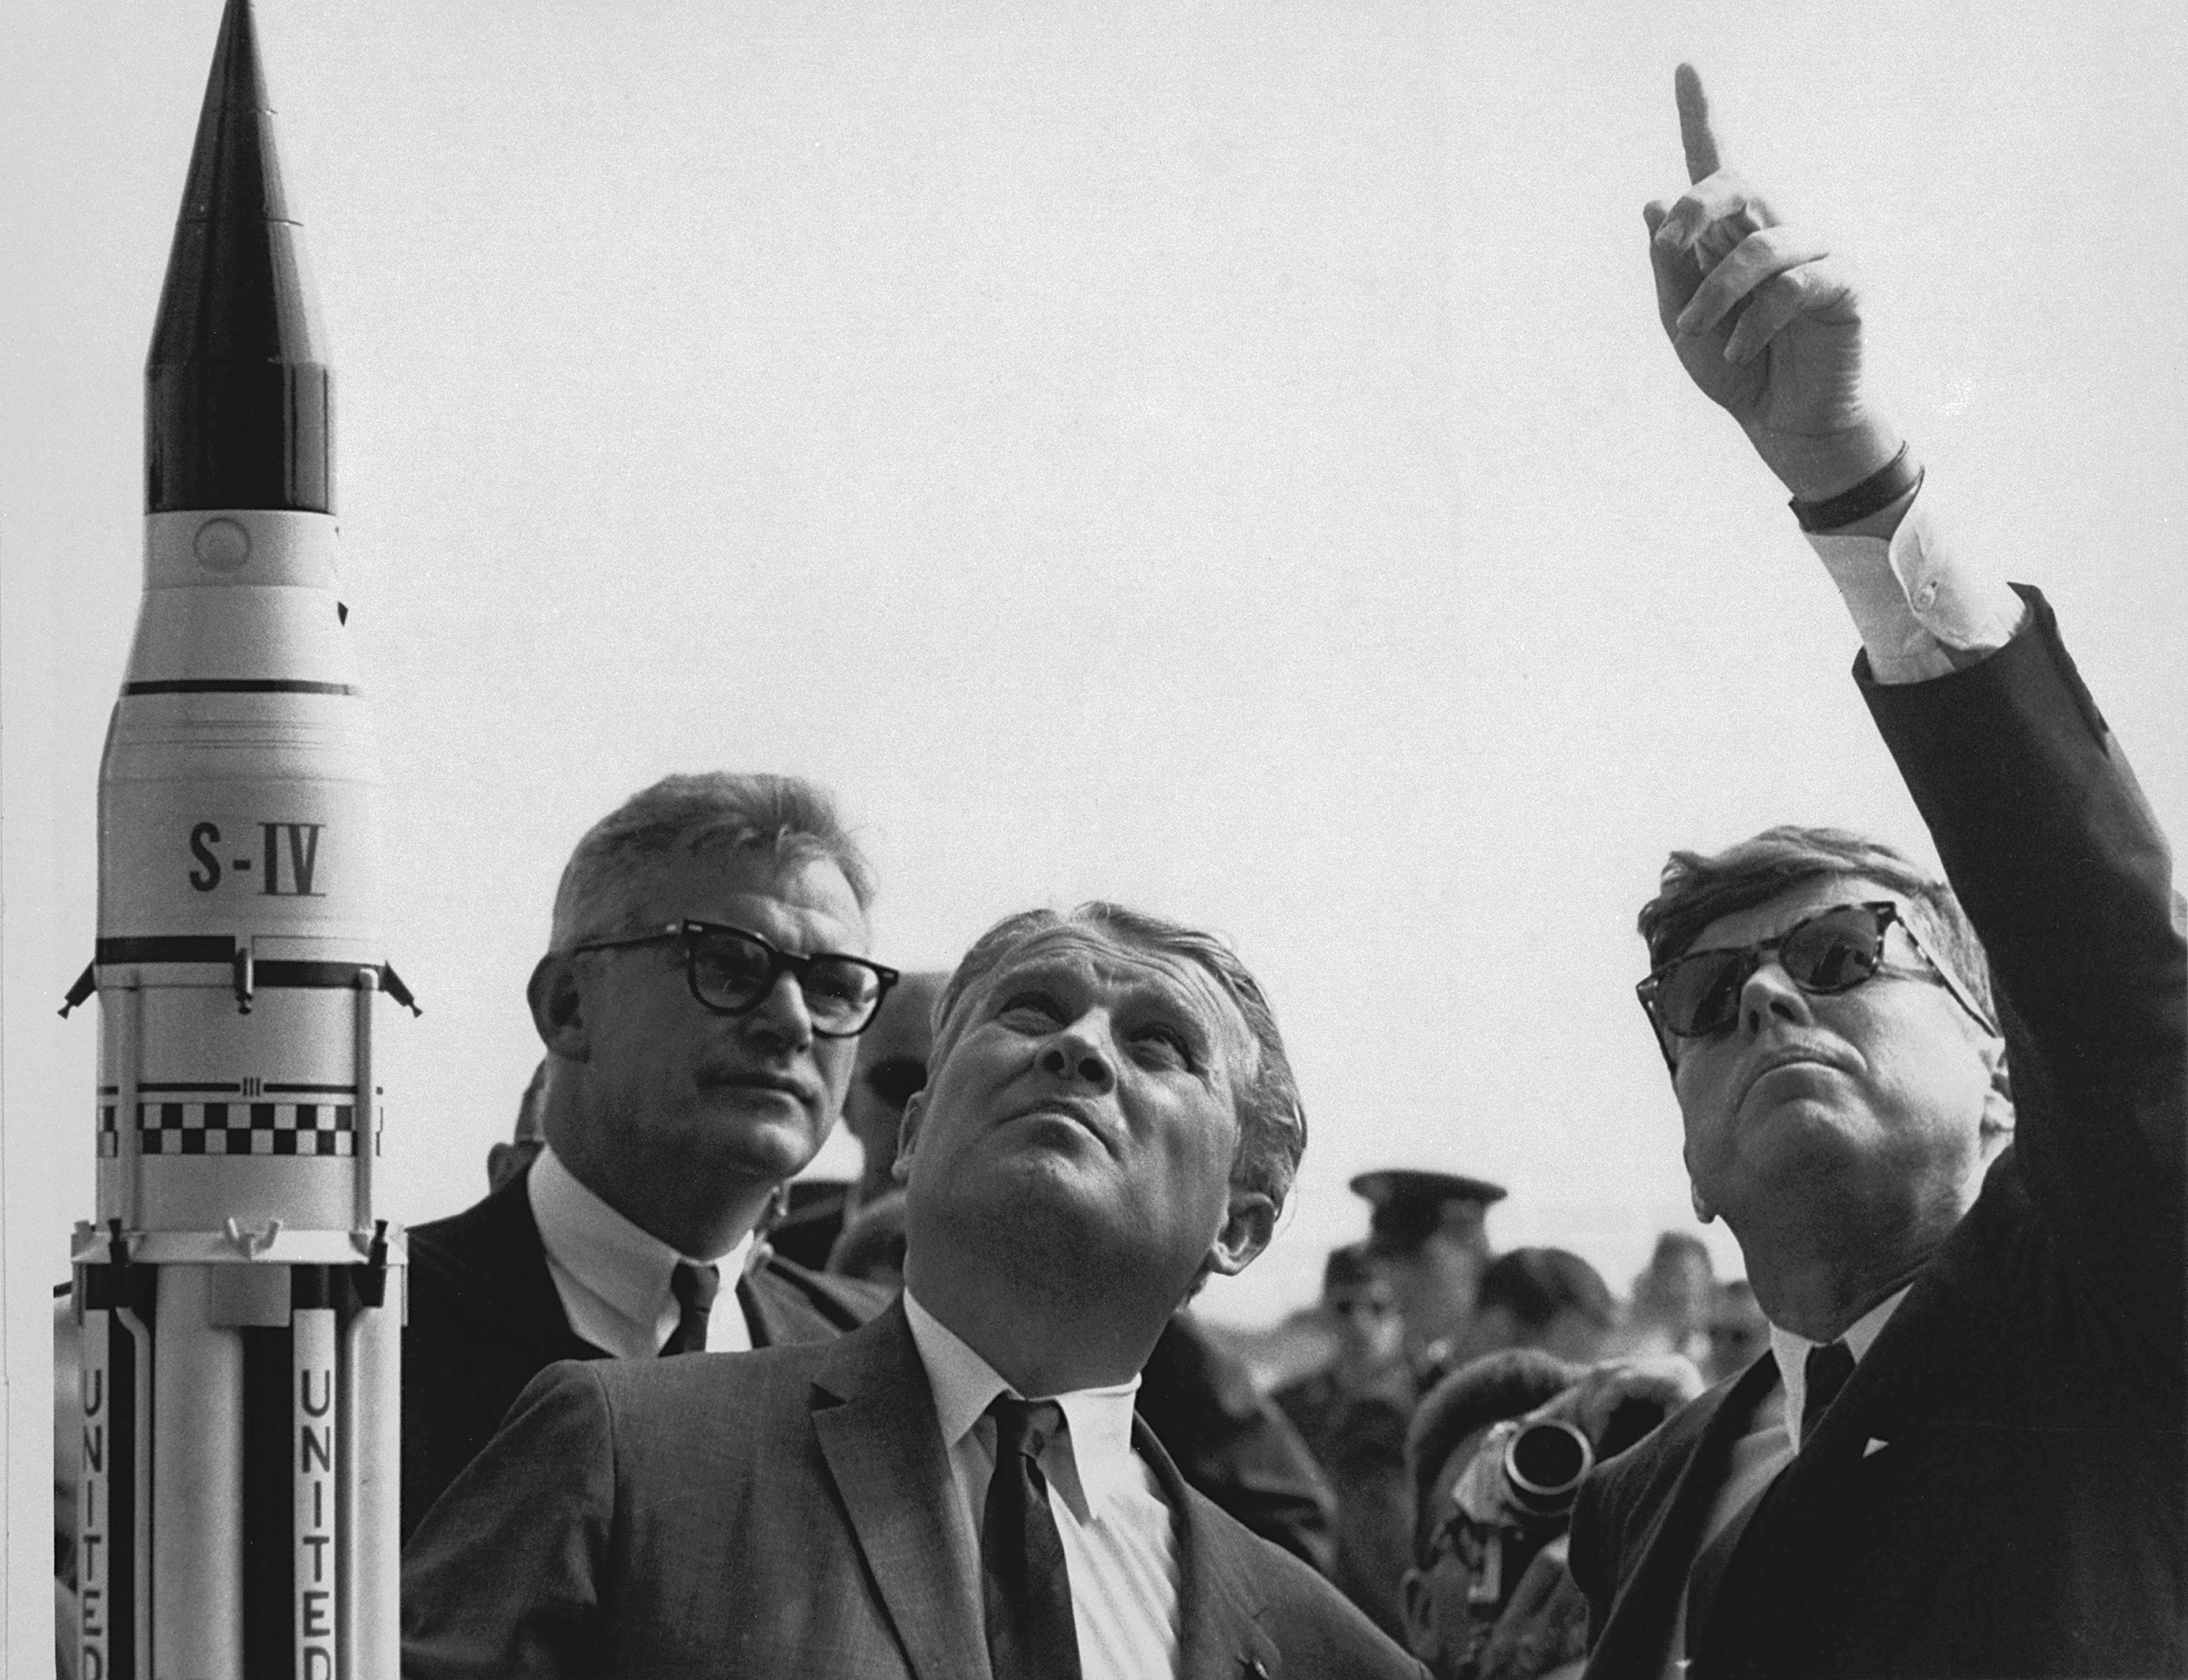 Seamans, von Braun and President Kennedy at Cape Canaveral - GPN-2000-001843